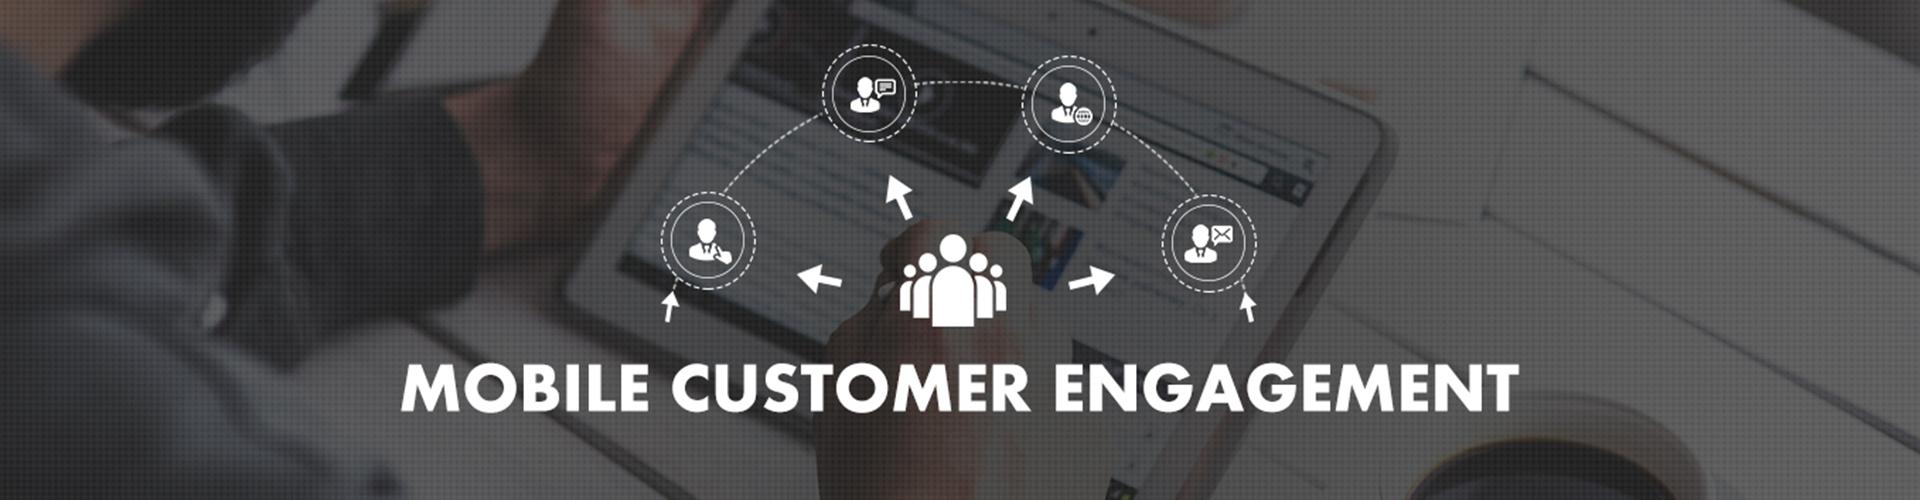 Mobile Customer Engagement Services